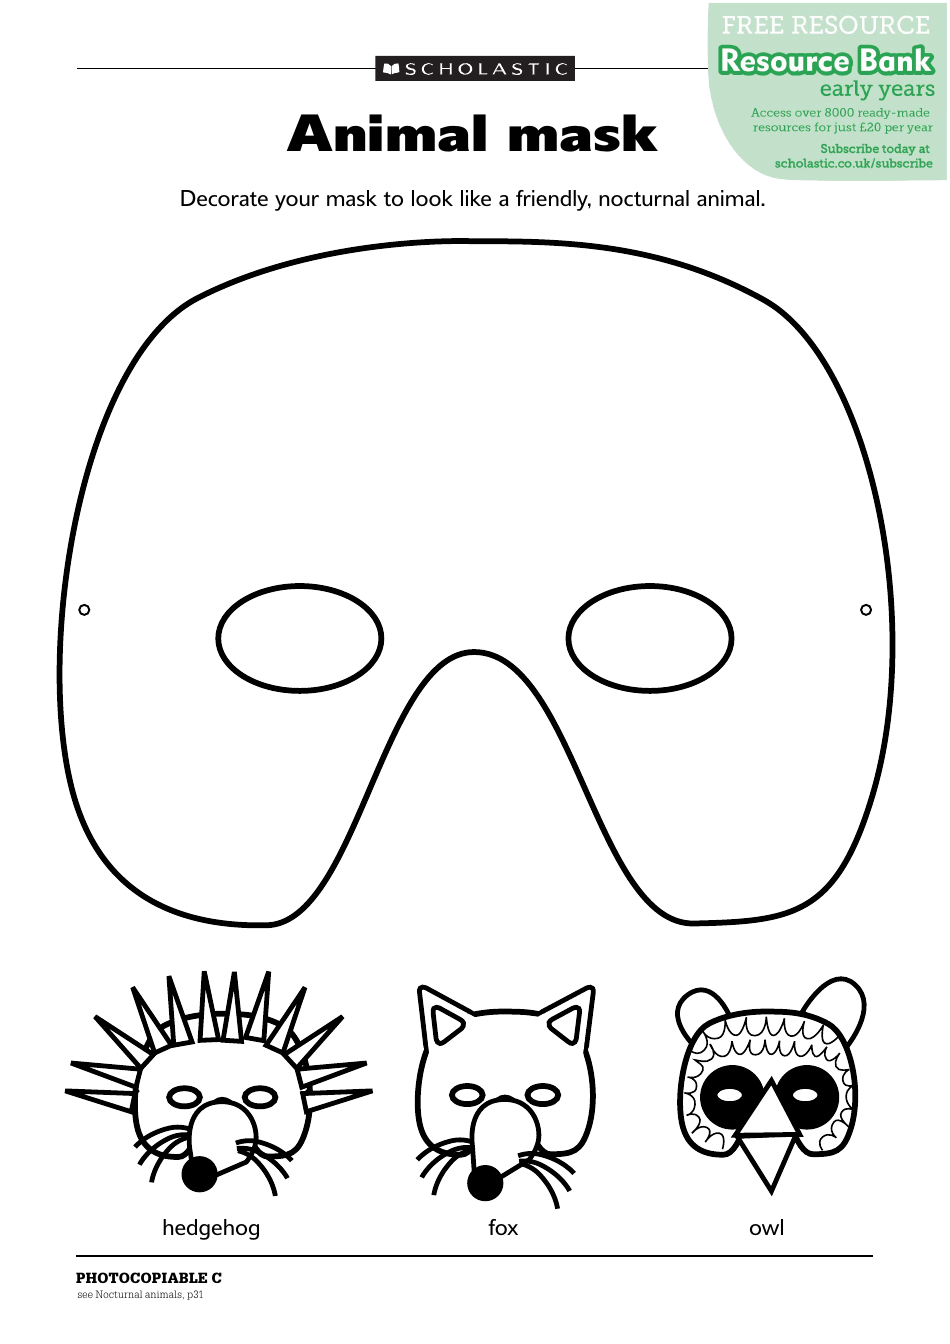 Nocturnal Animal Mask Design Template, Page 1